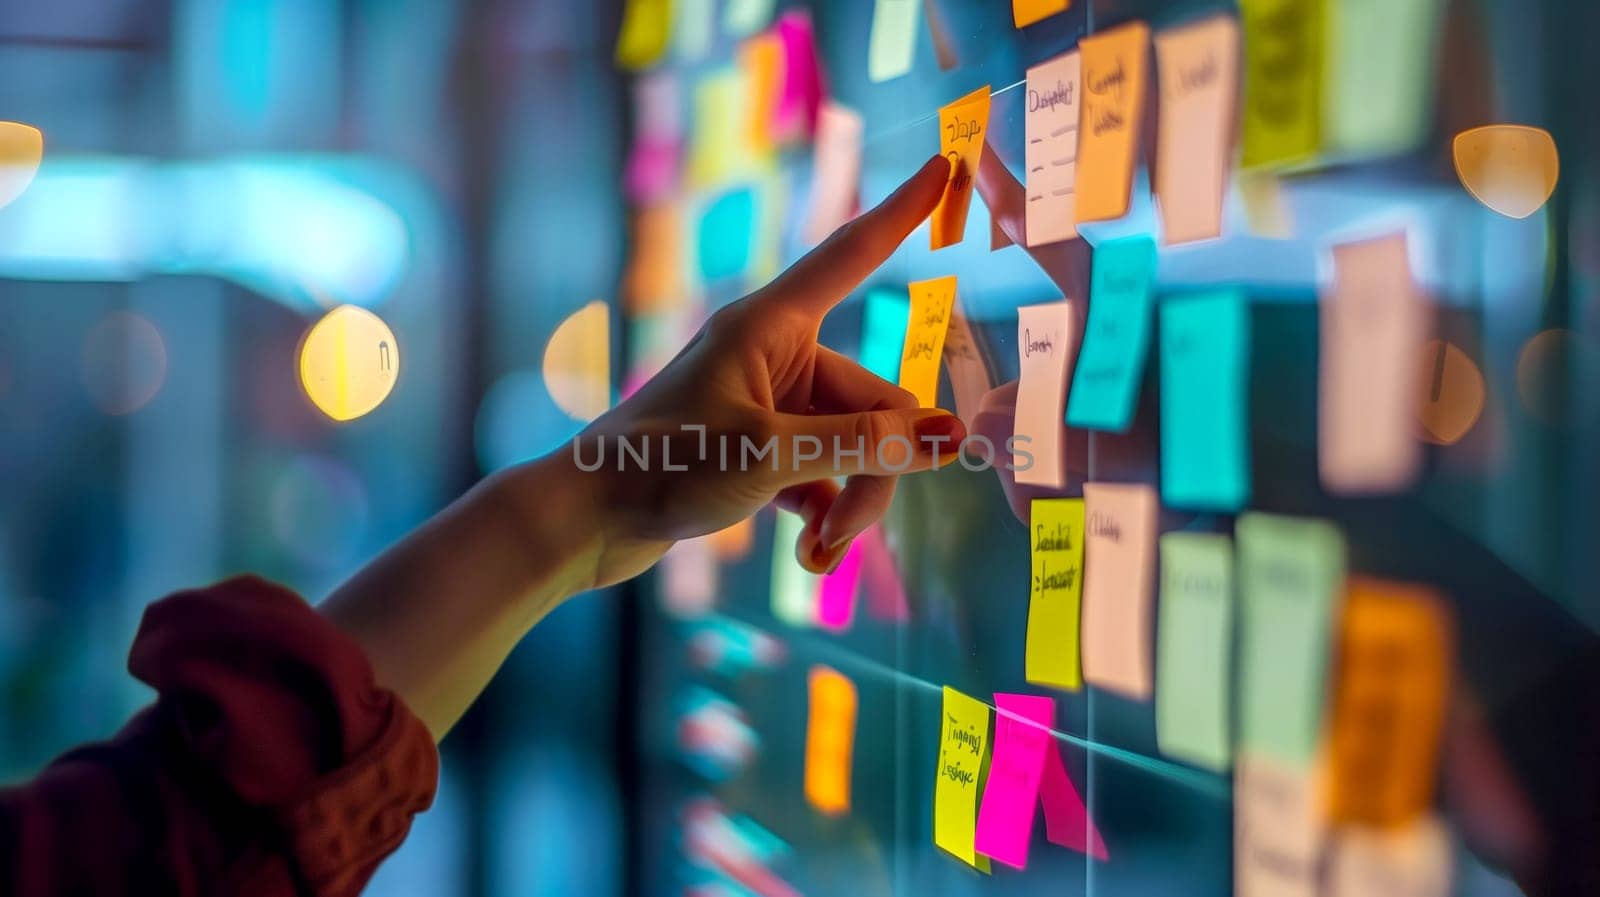 A hand is pointing at a wall covered in colorful sticky notes. The notes are arranged in a grid, with some of them overlapping each other